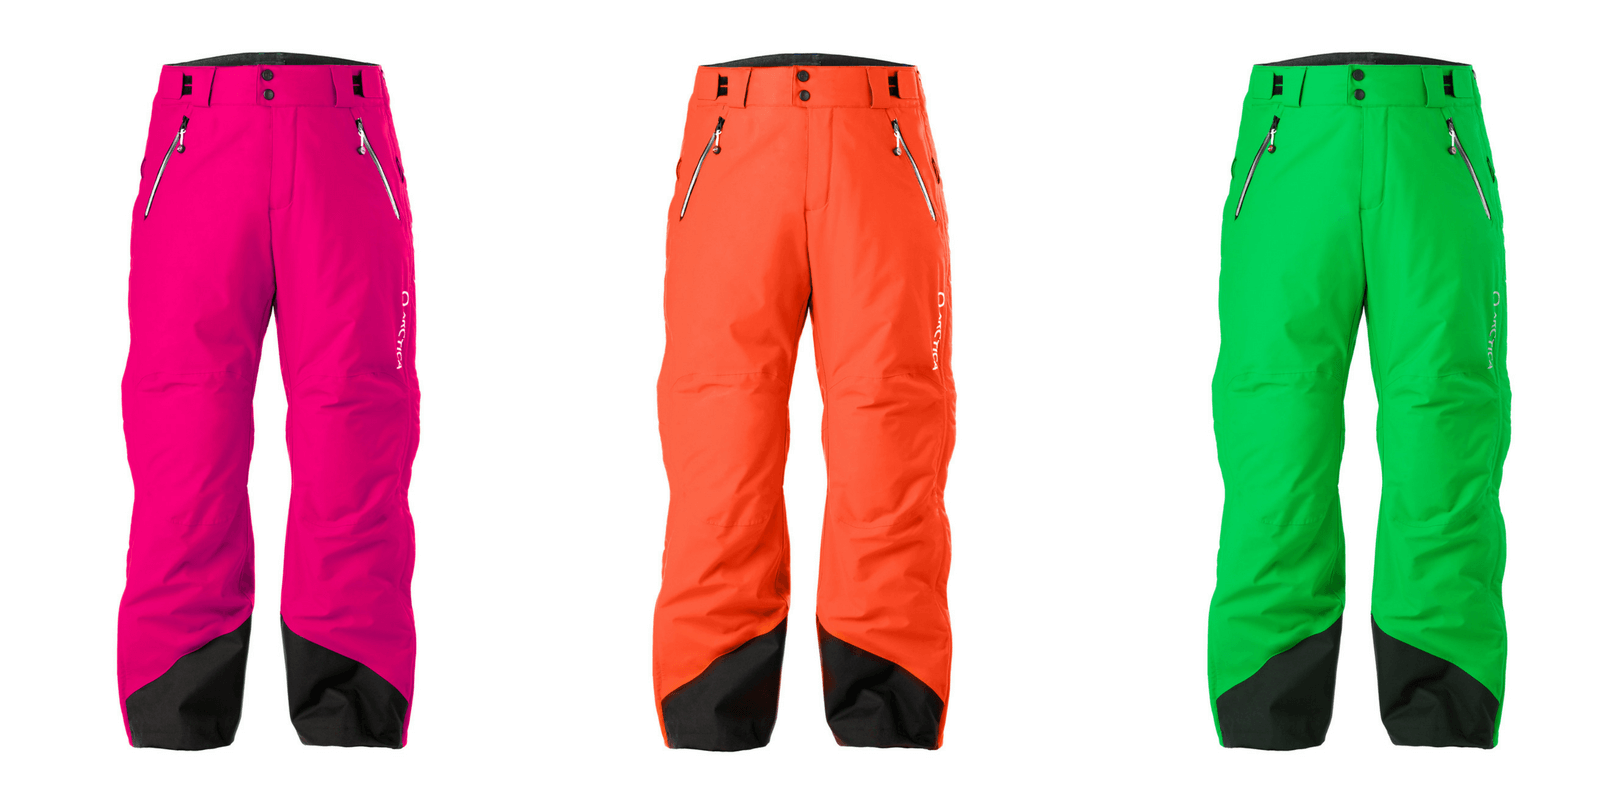 Arctica Side Zip 2.0 neon pant colors for 2017-18. Hot Pink, Tangerine and Lime. 